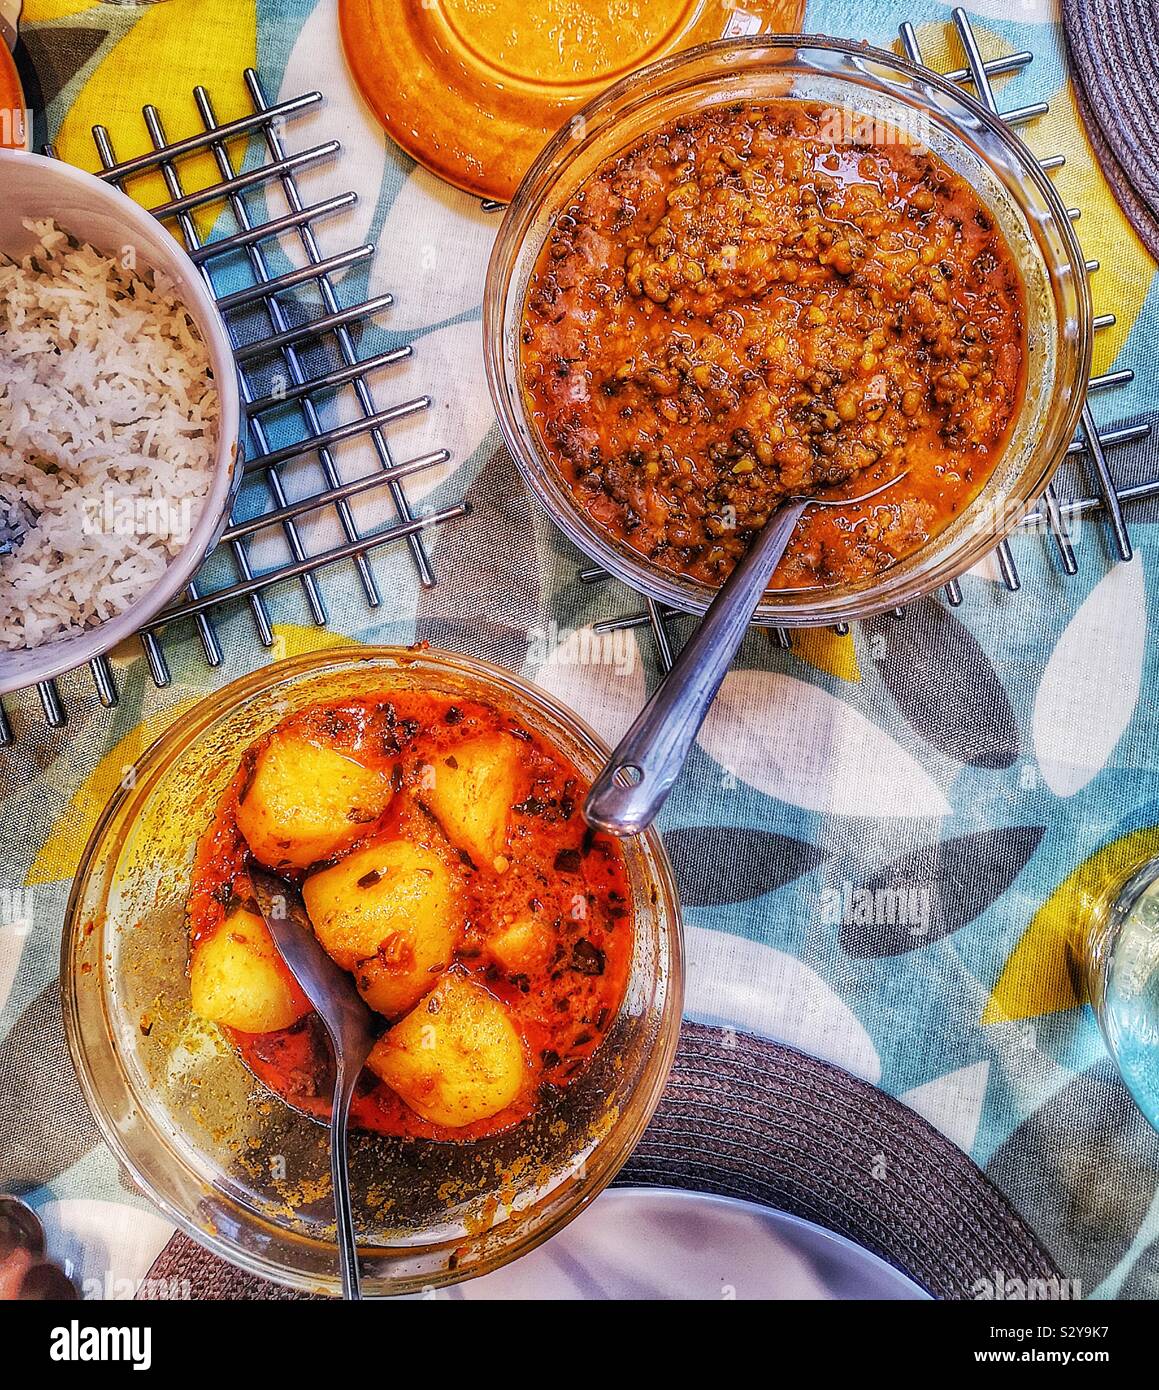 Elevated view of homemade Indian meal with rice, potato curry and mung dal Stock Photo